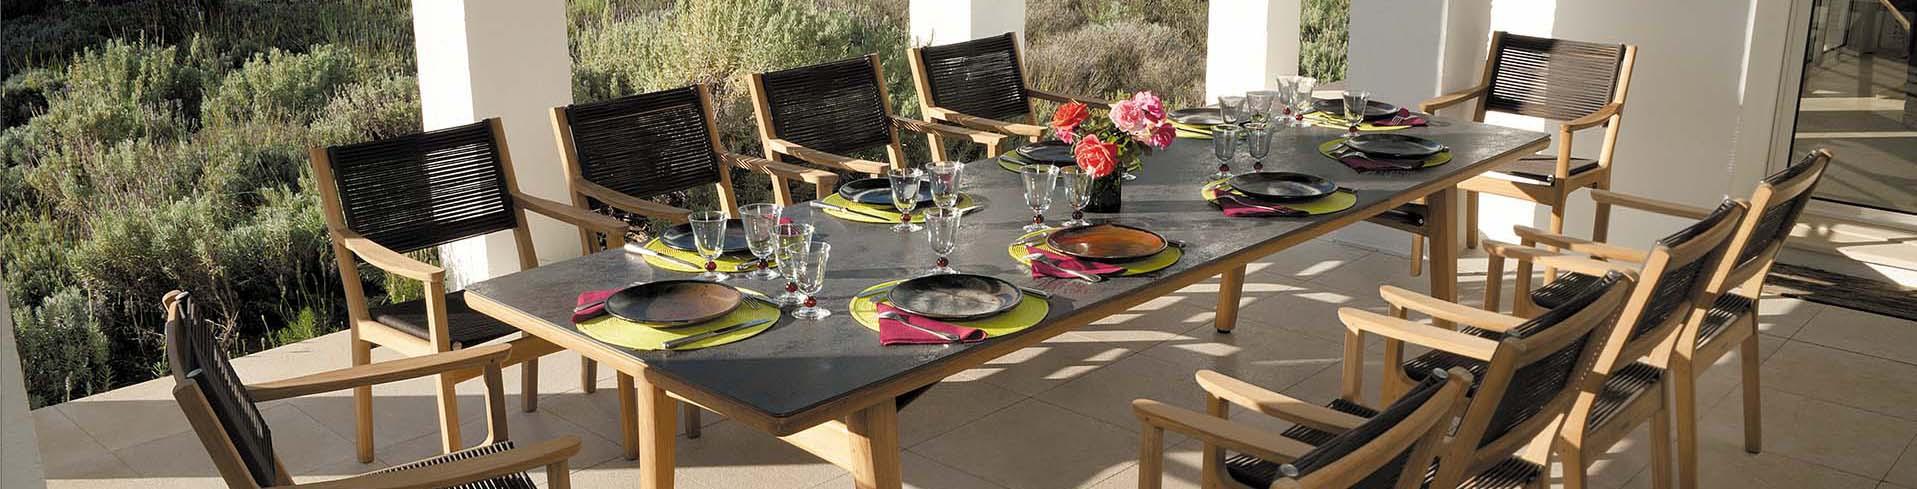 Barlow Tyrie Outdoor Tables